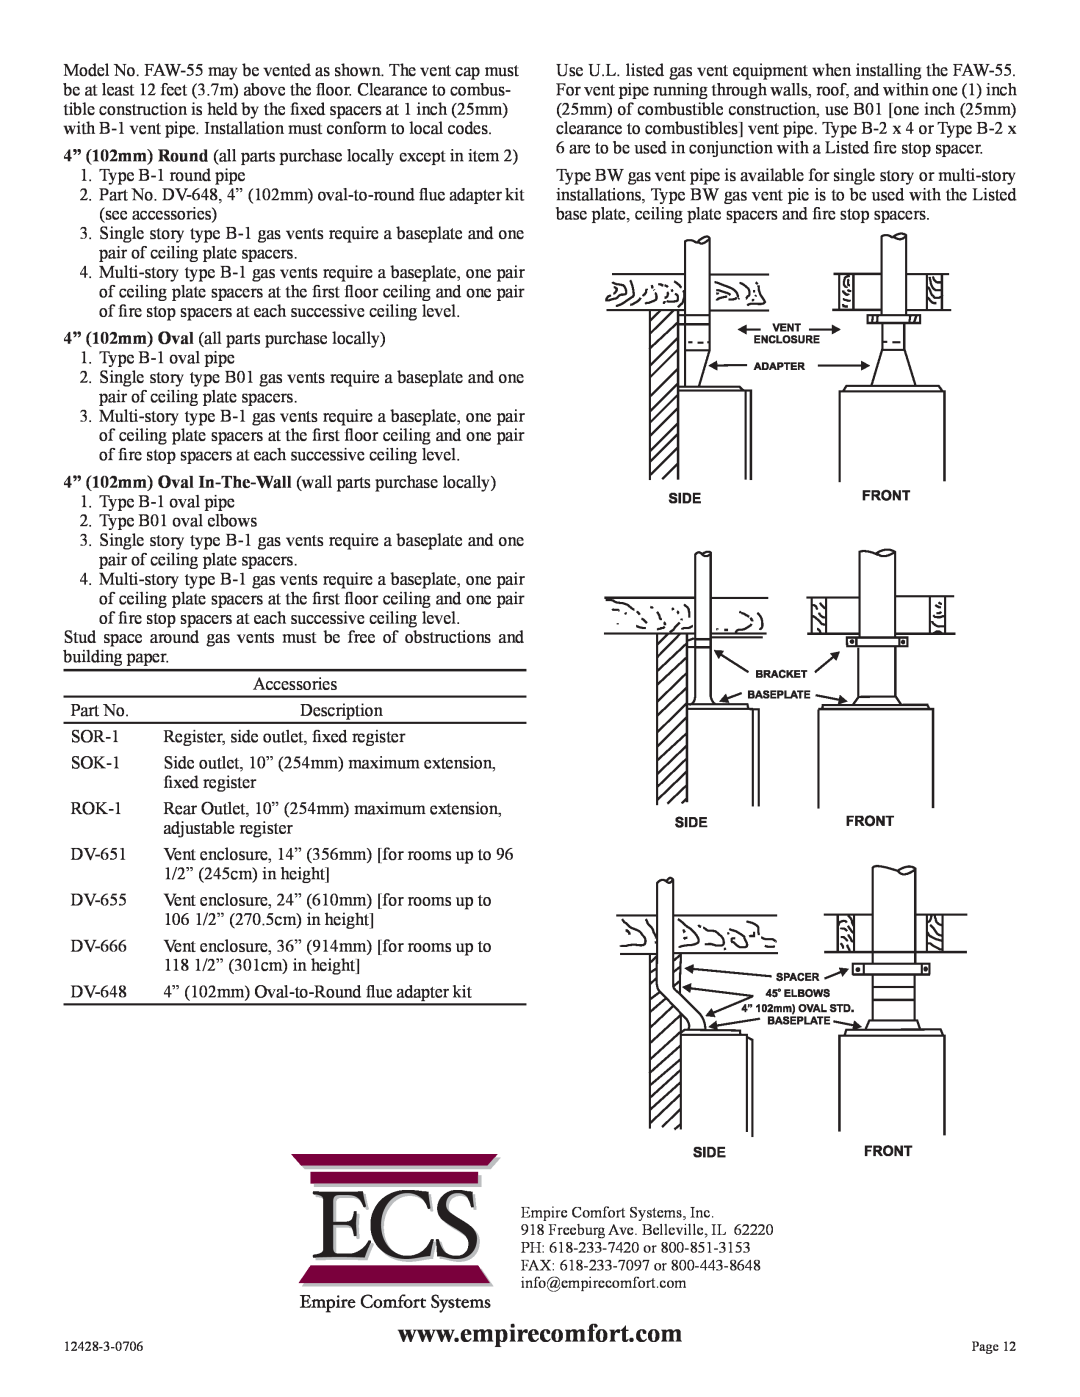 Empire Comfort Systems FAW-55SPP installation instructions 